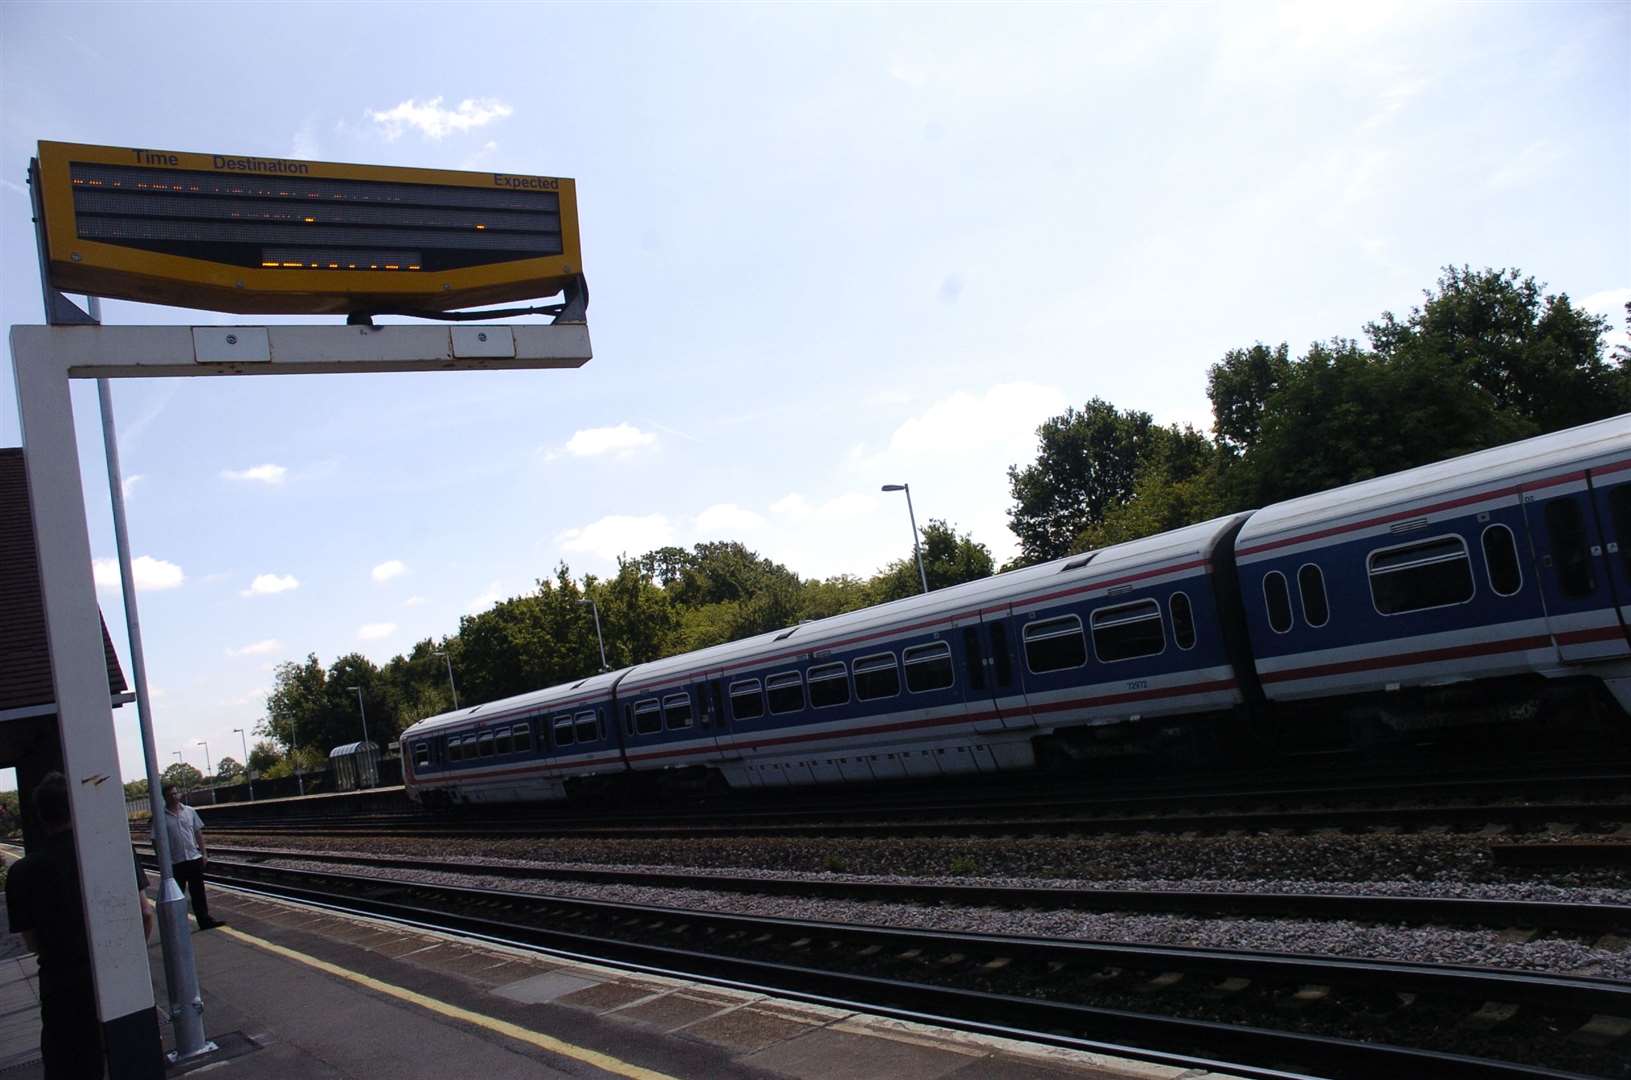 Train fares have already increased by 2.6%